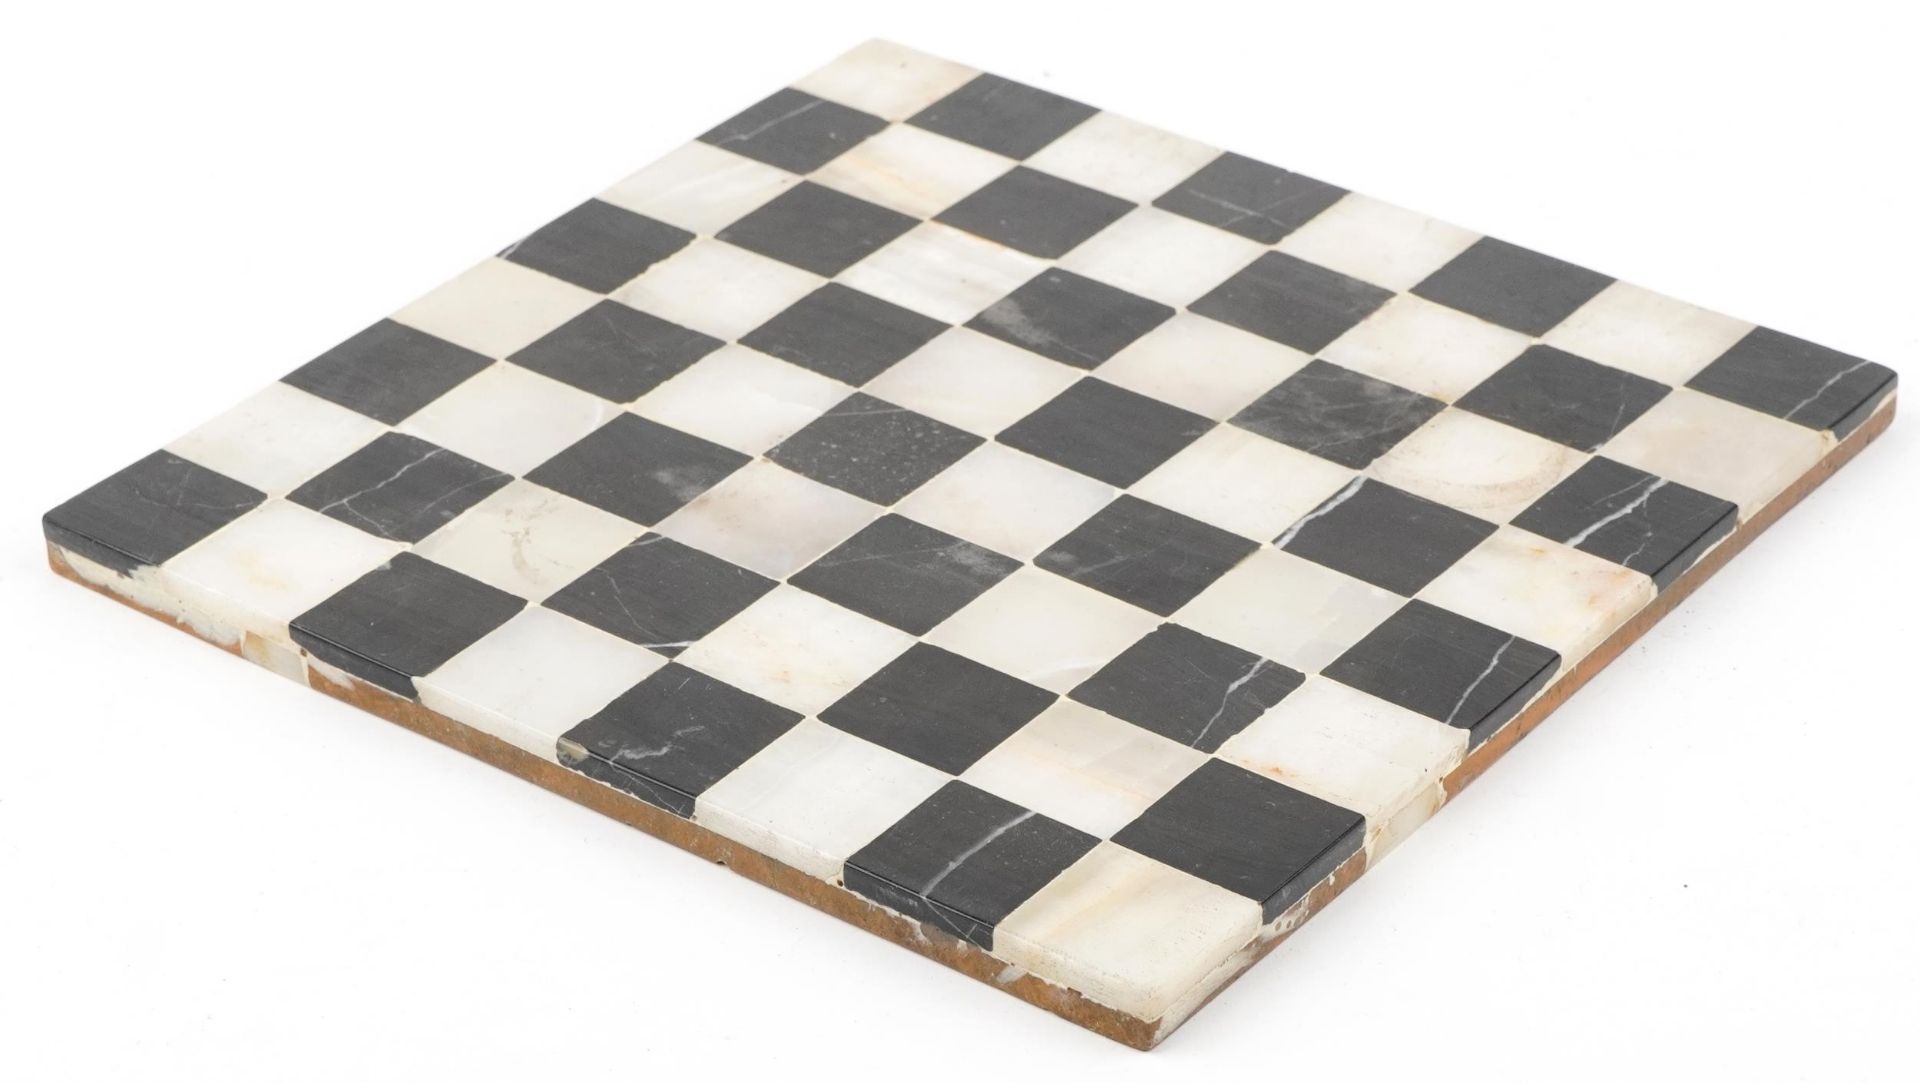 Black marble and onyx chess board, 28.5cm x 28.5cm